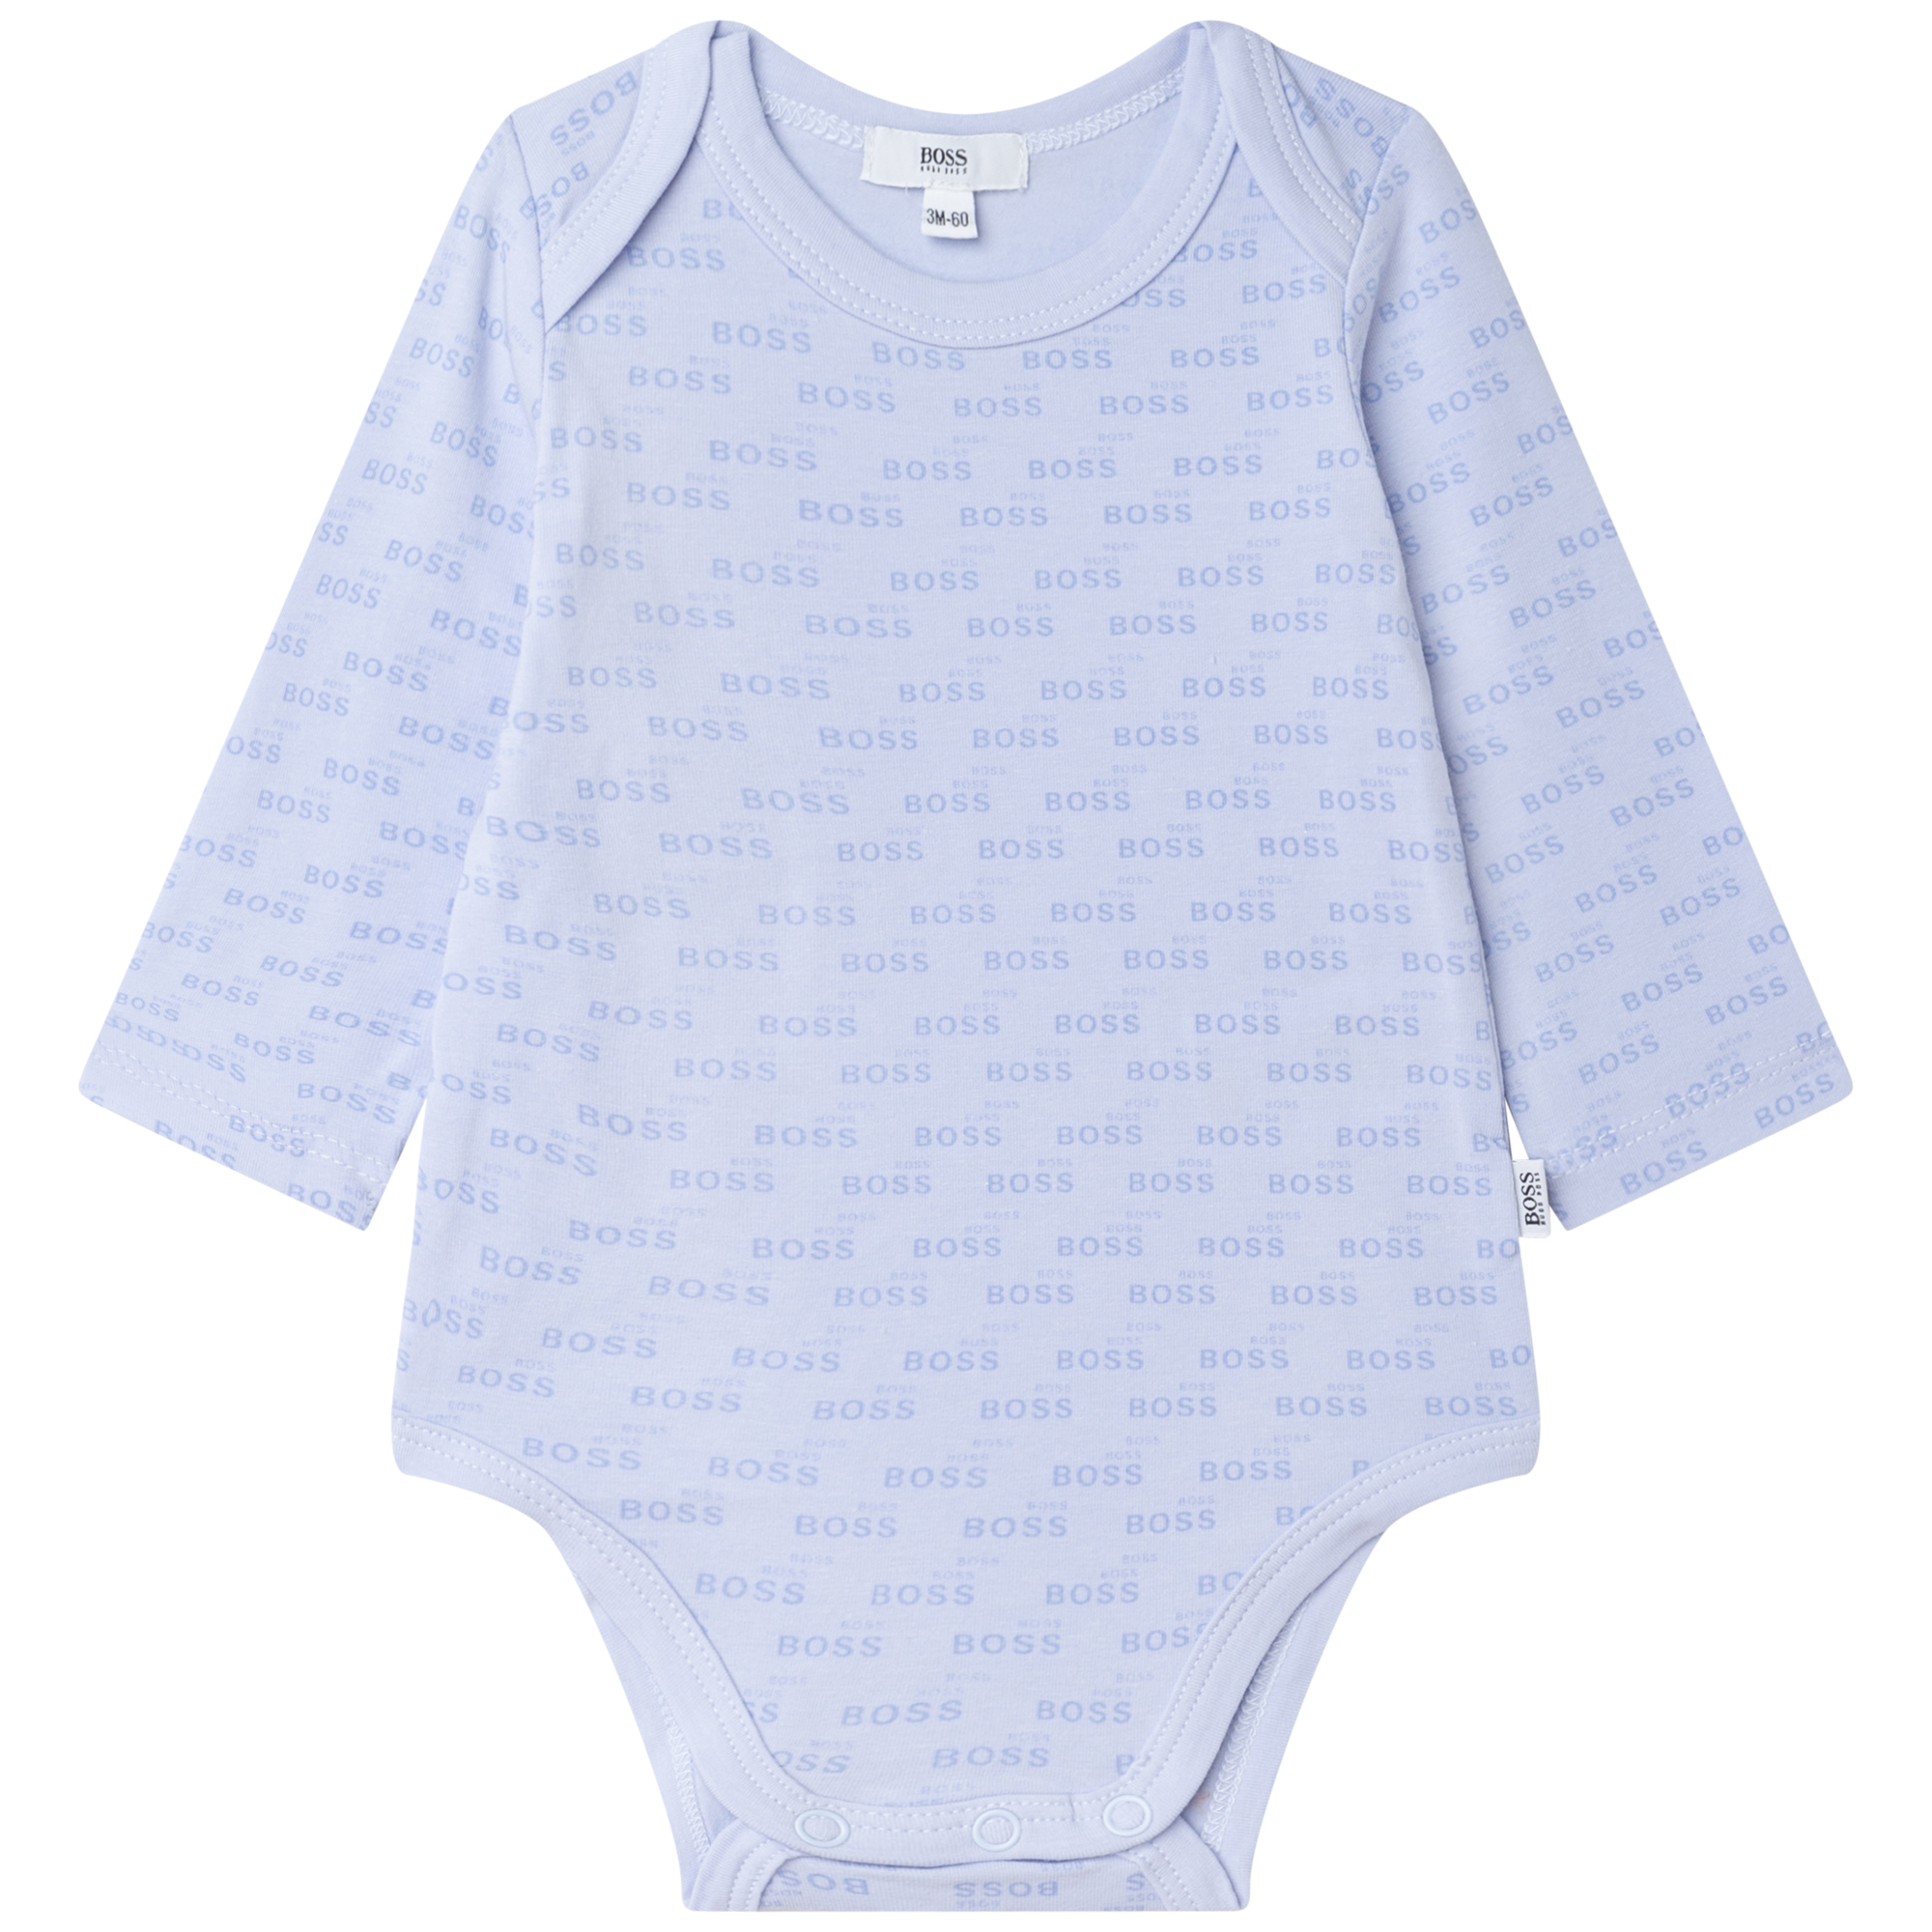 Pack of 2 cotton rompers BOSS for UNISEX